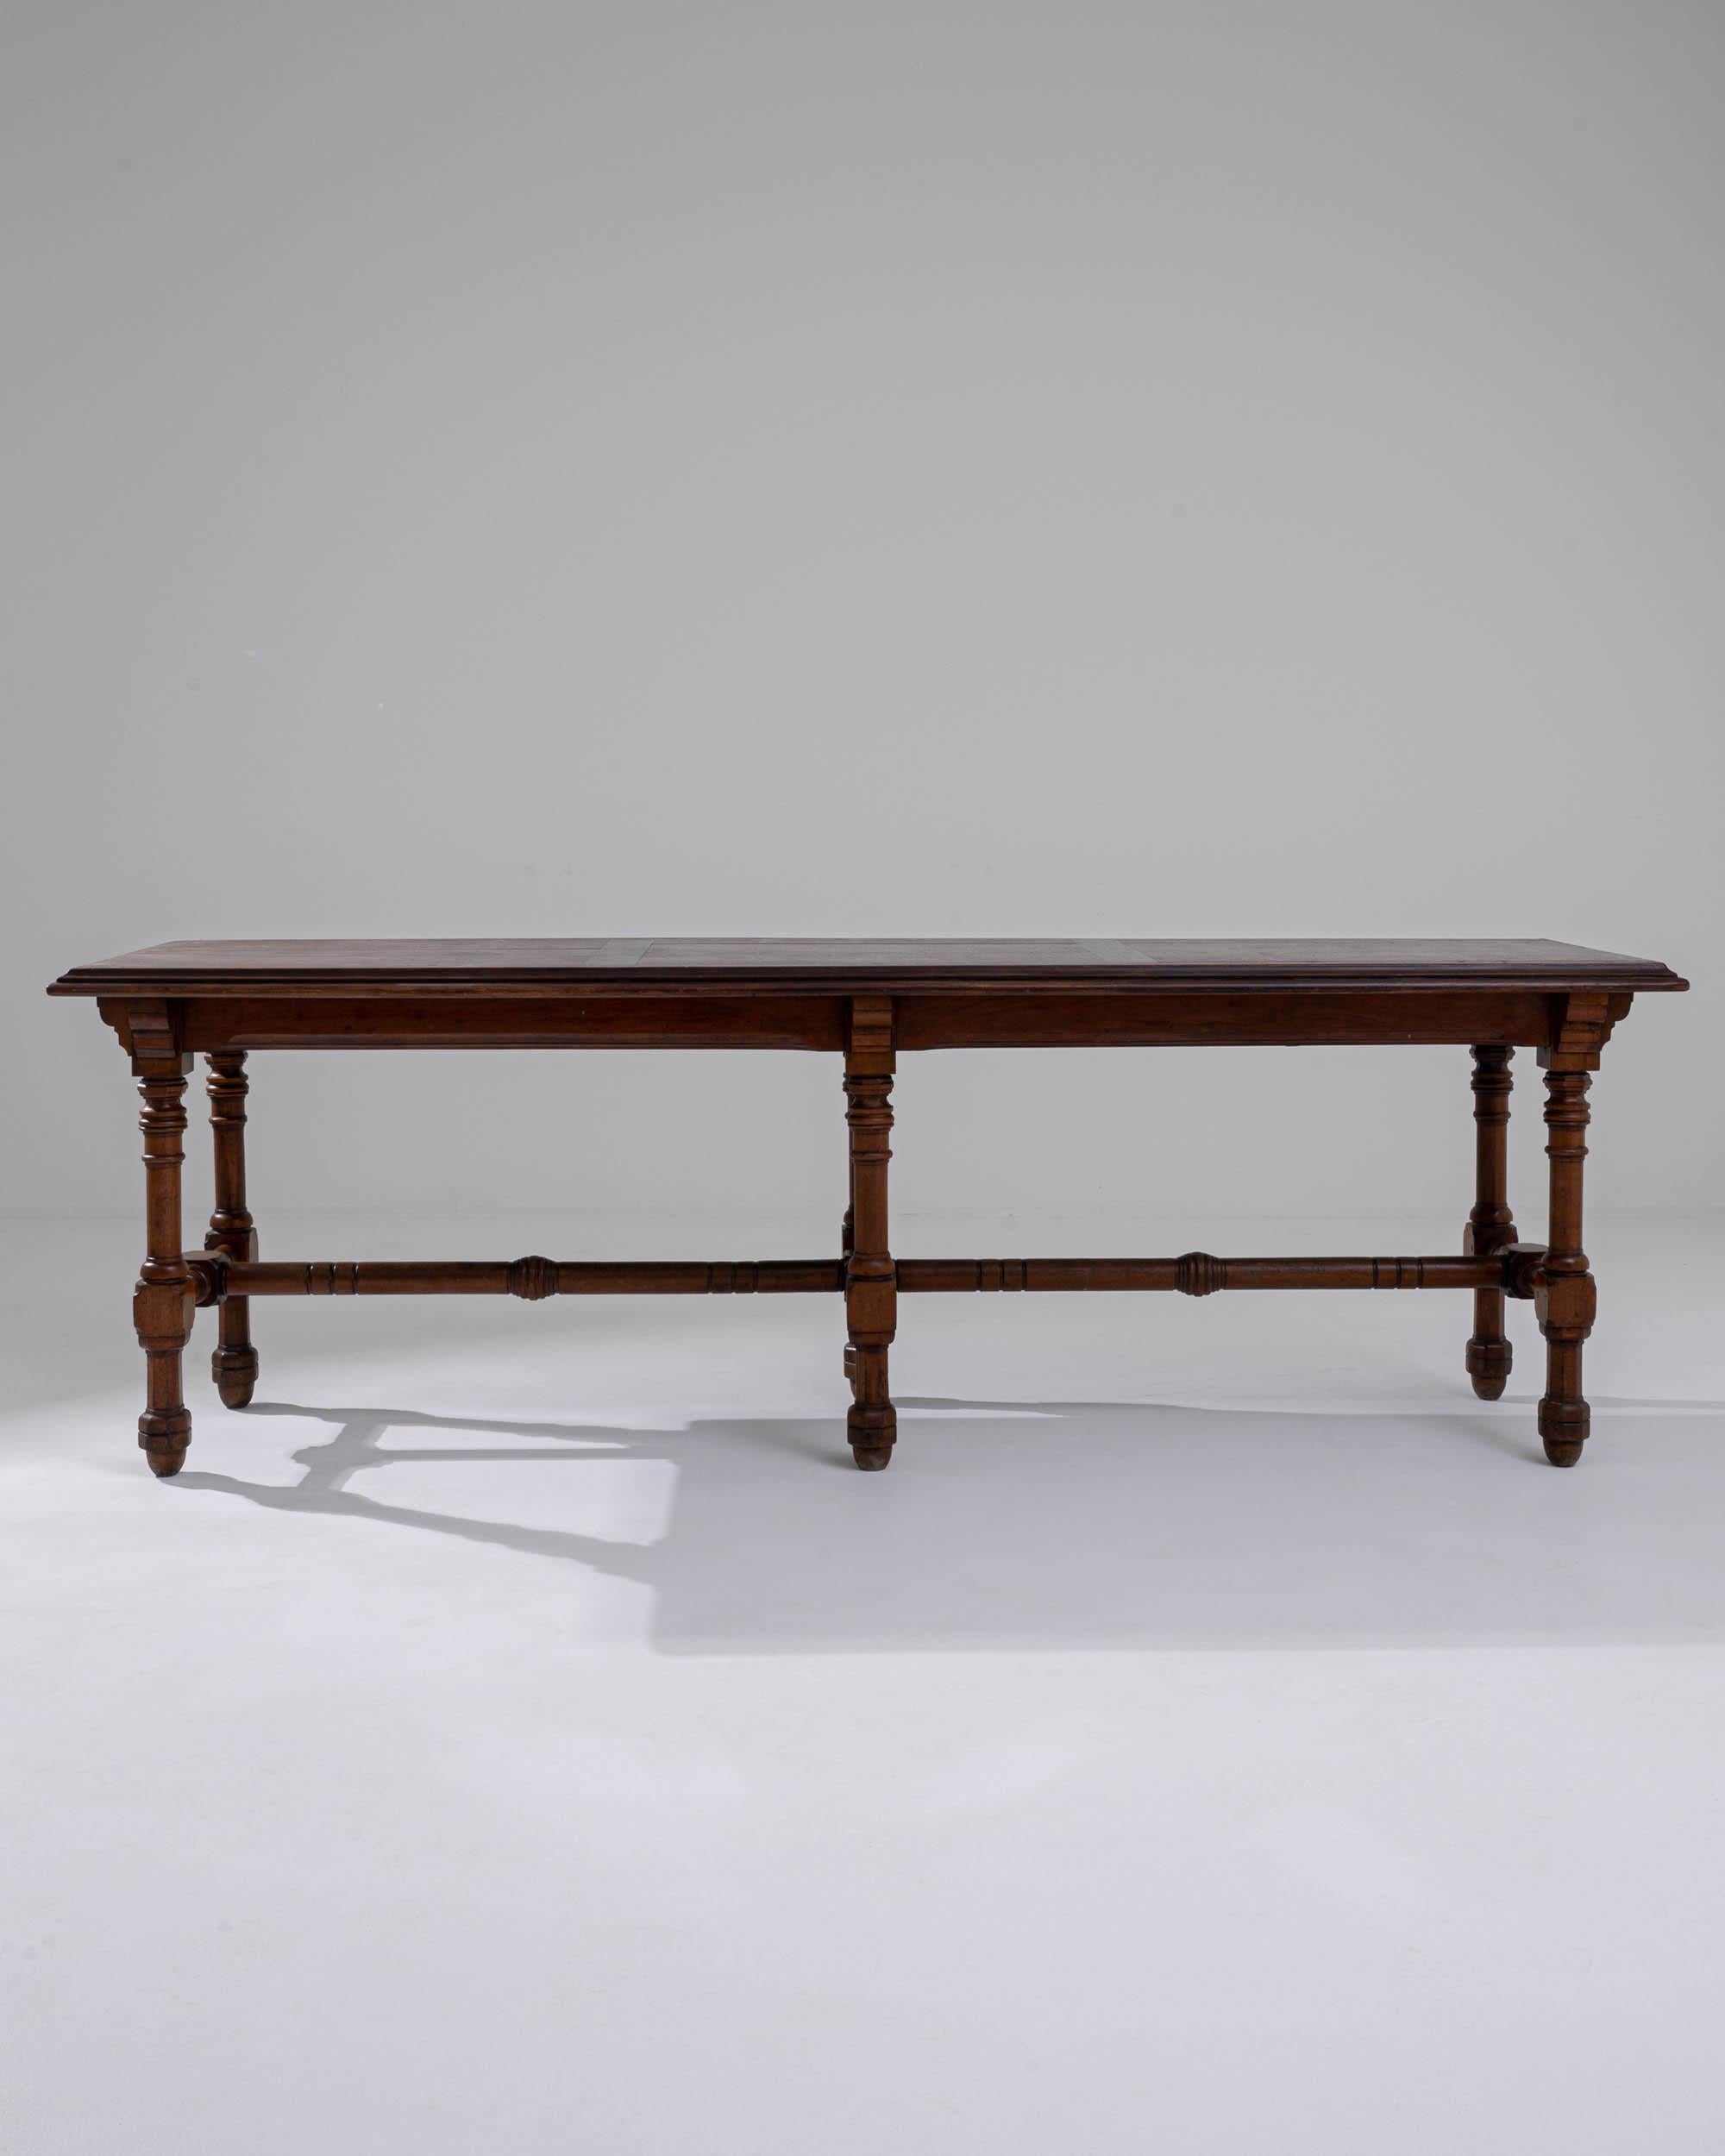 A rich original patina gives this vintage table a distinguished air. Made in Great Britain at the turn of the century, the design reflects the handsome, heavy furniture of the Victorian age. Architectural details — such as the contoured brackets